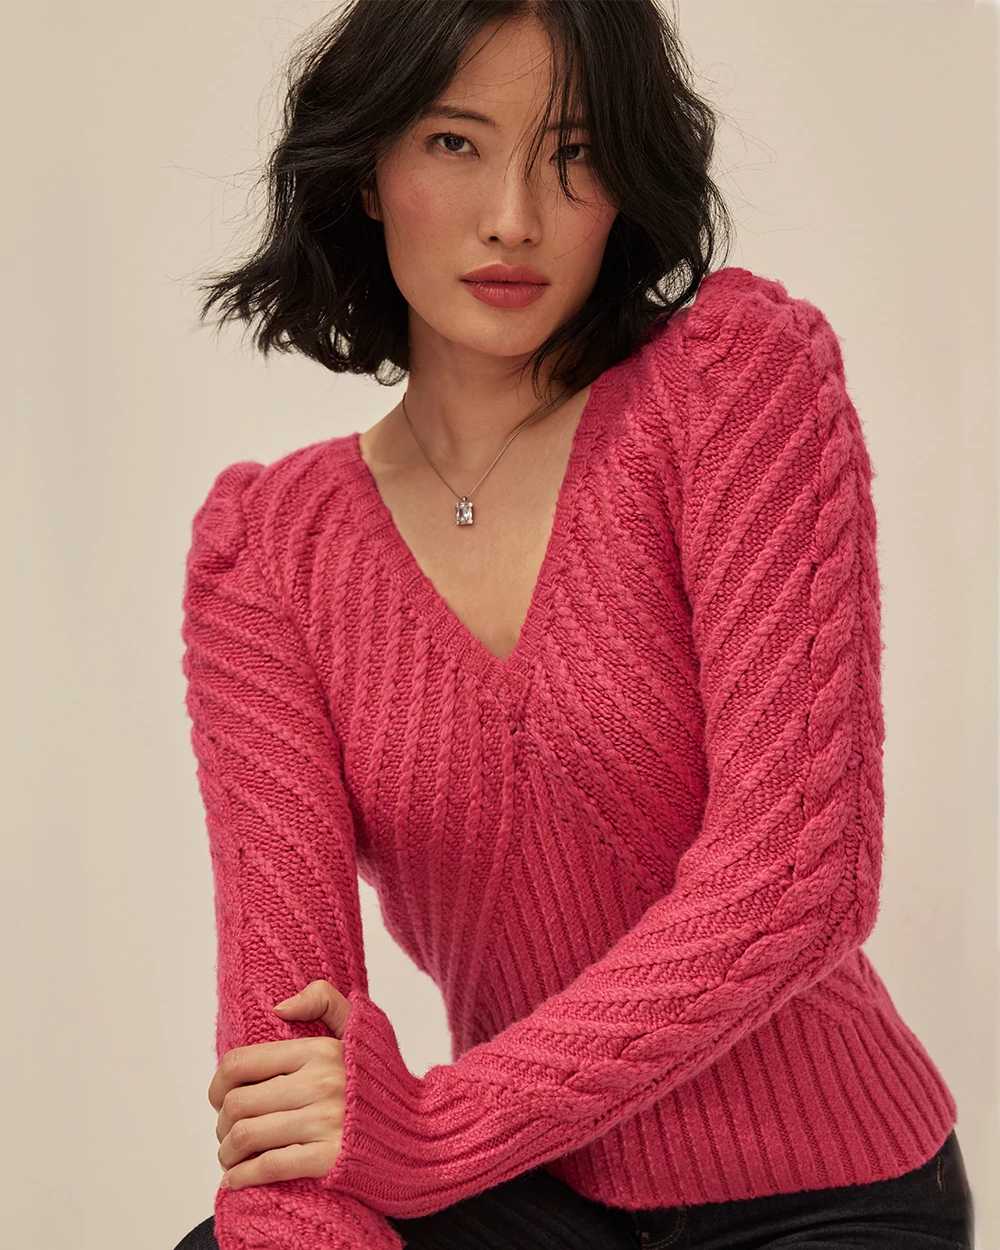 V-Neck Puff Sleeve Cable Pullover Sweater